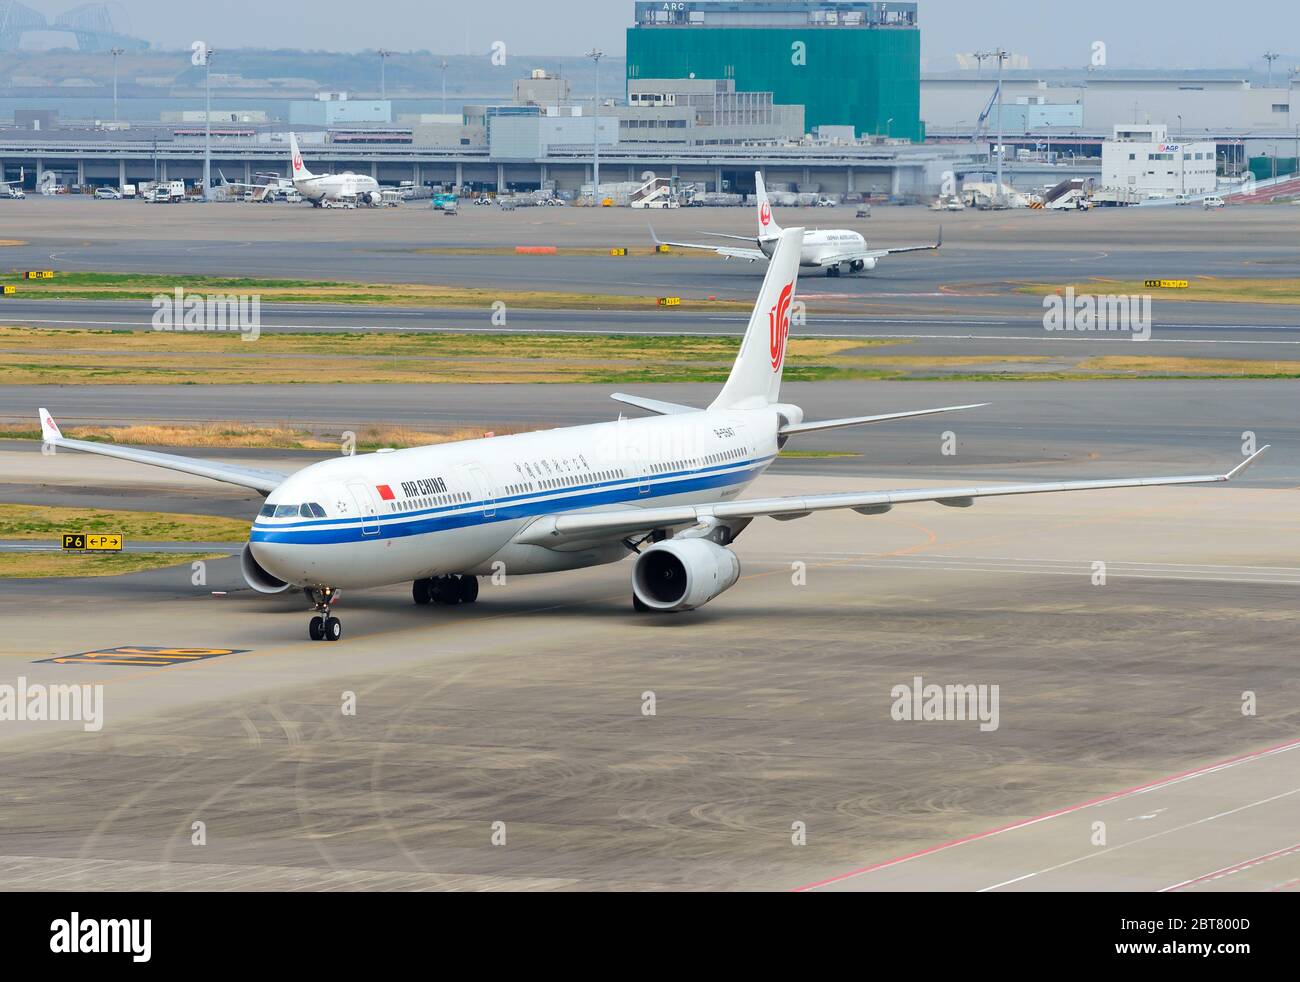 Air China Airbus A330 at Haneda Airport Tokyo Japan. B-5947 airplane from chinese airline. Classic livery. Stock Photo